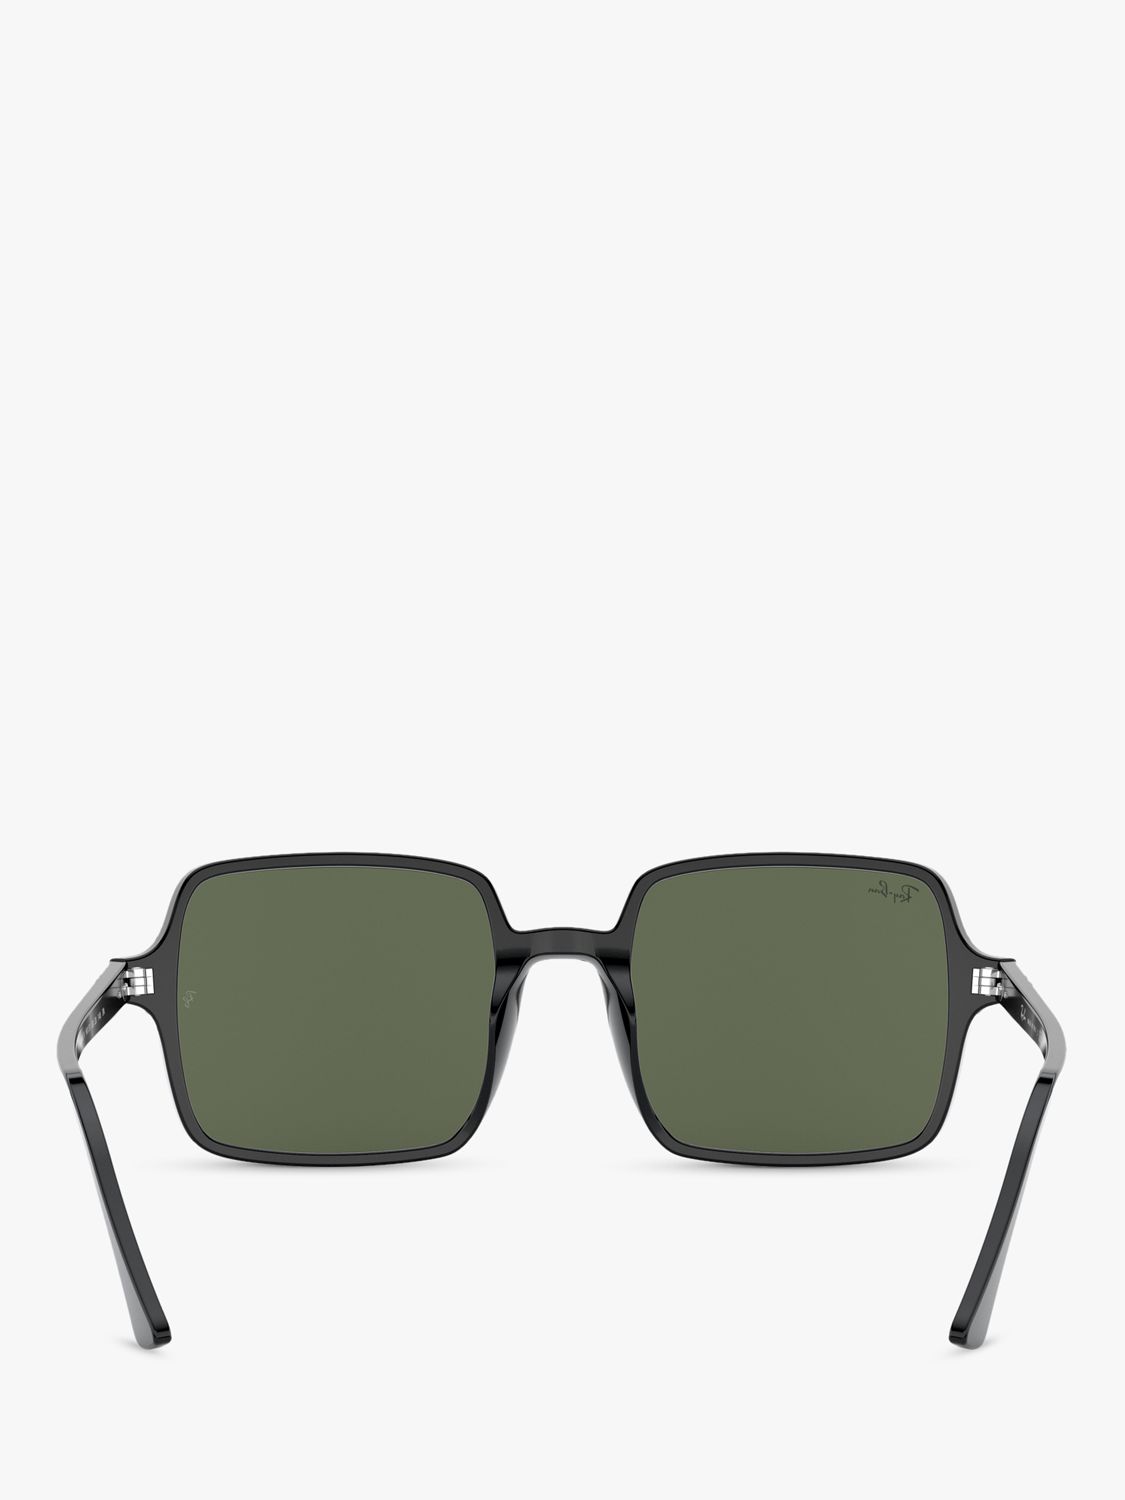 Buy Ray-Ban RB1973 Women's Square Sunglasses Online at johnlewis.com